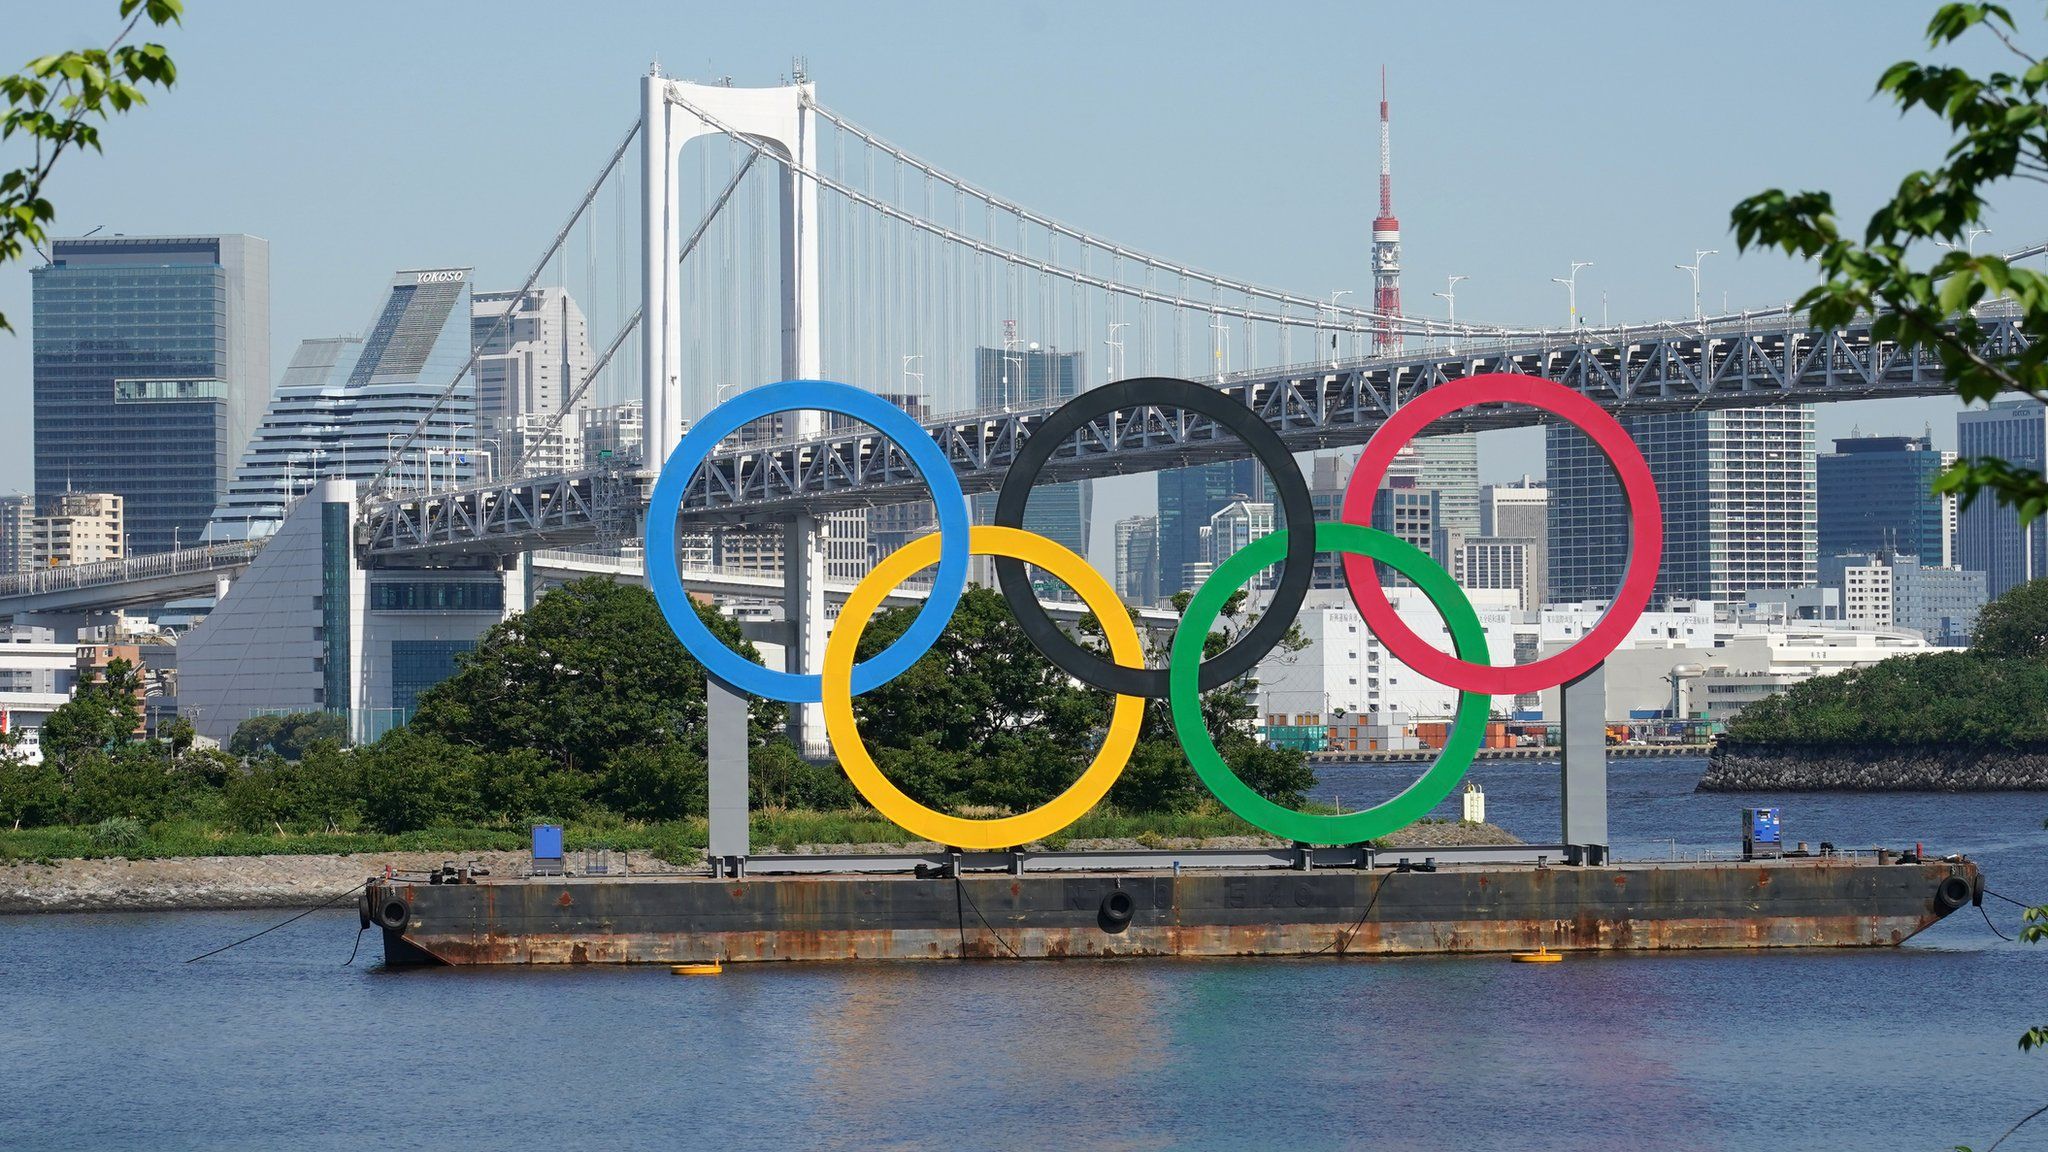 Picture of the Olympic rings on a boat in a Tokyo river